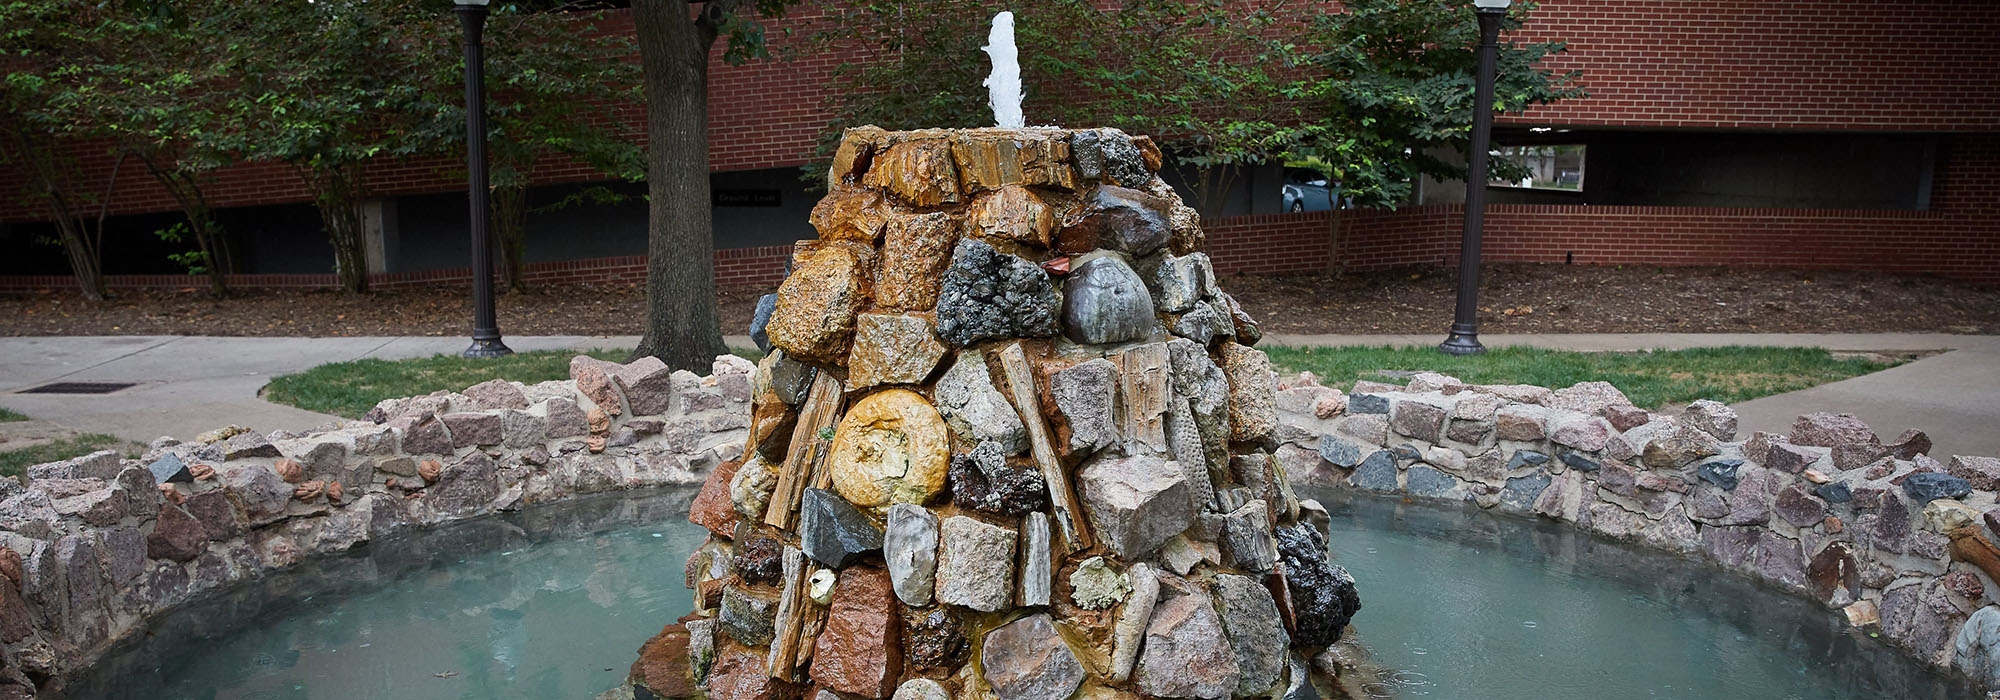 Water fountain on the OU campus in Norman, Oklahoma.